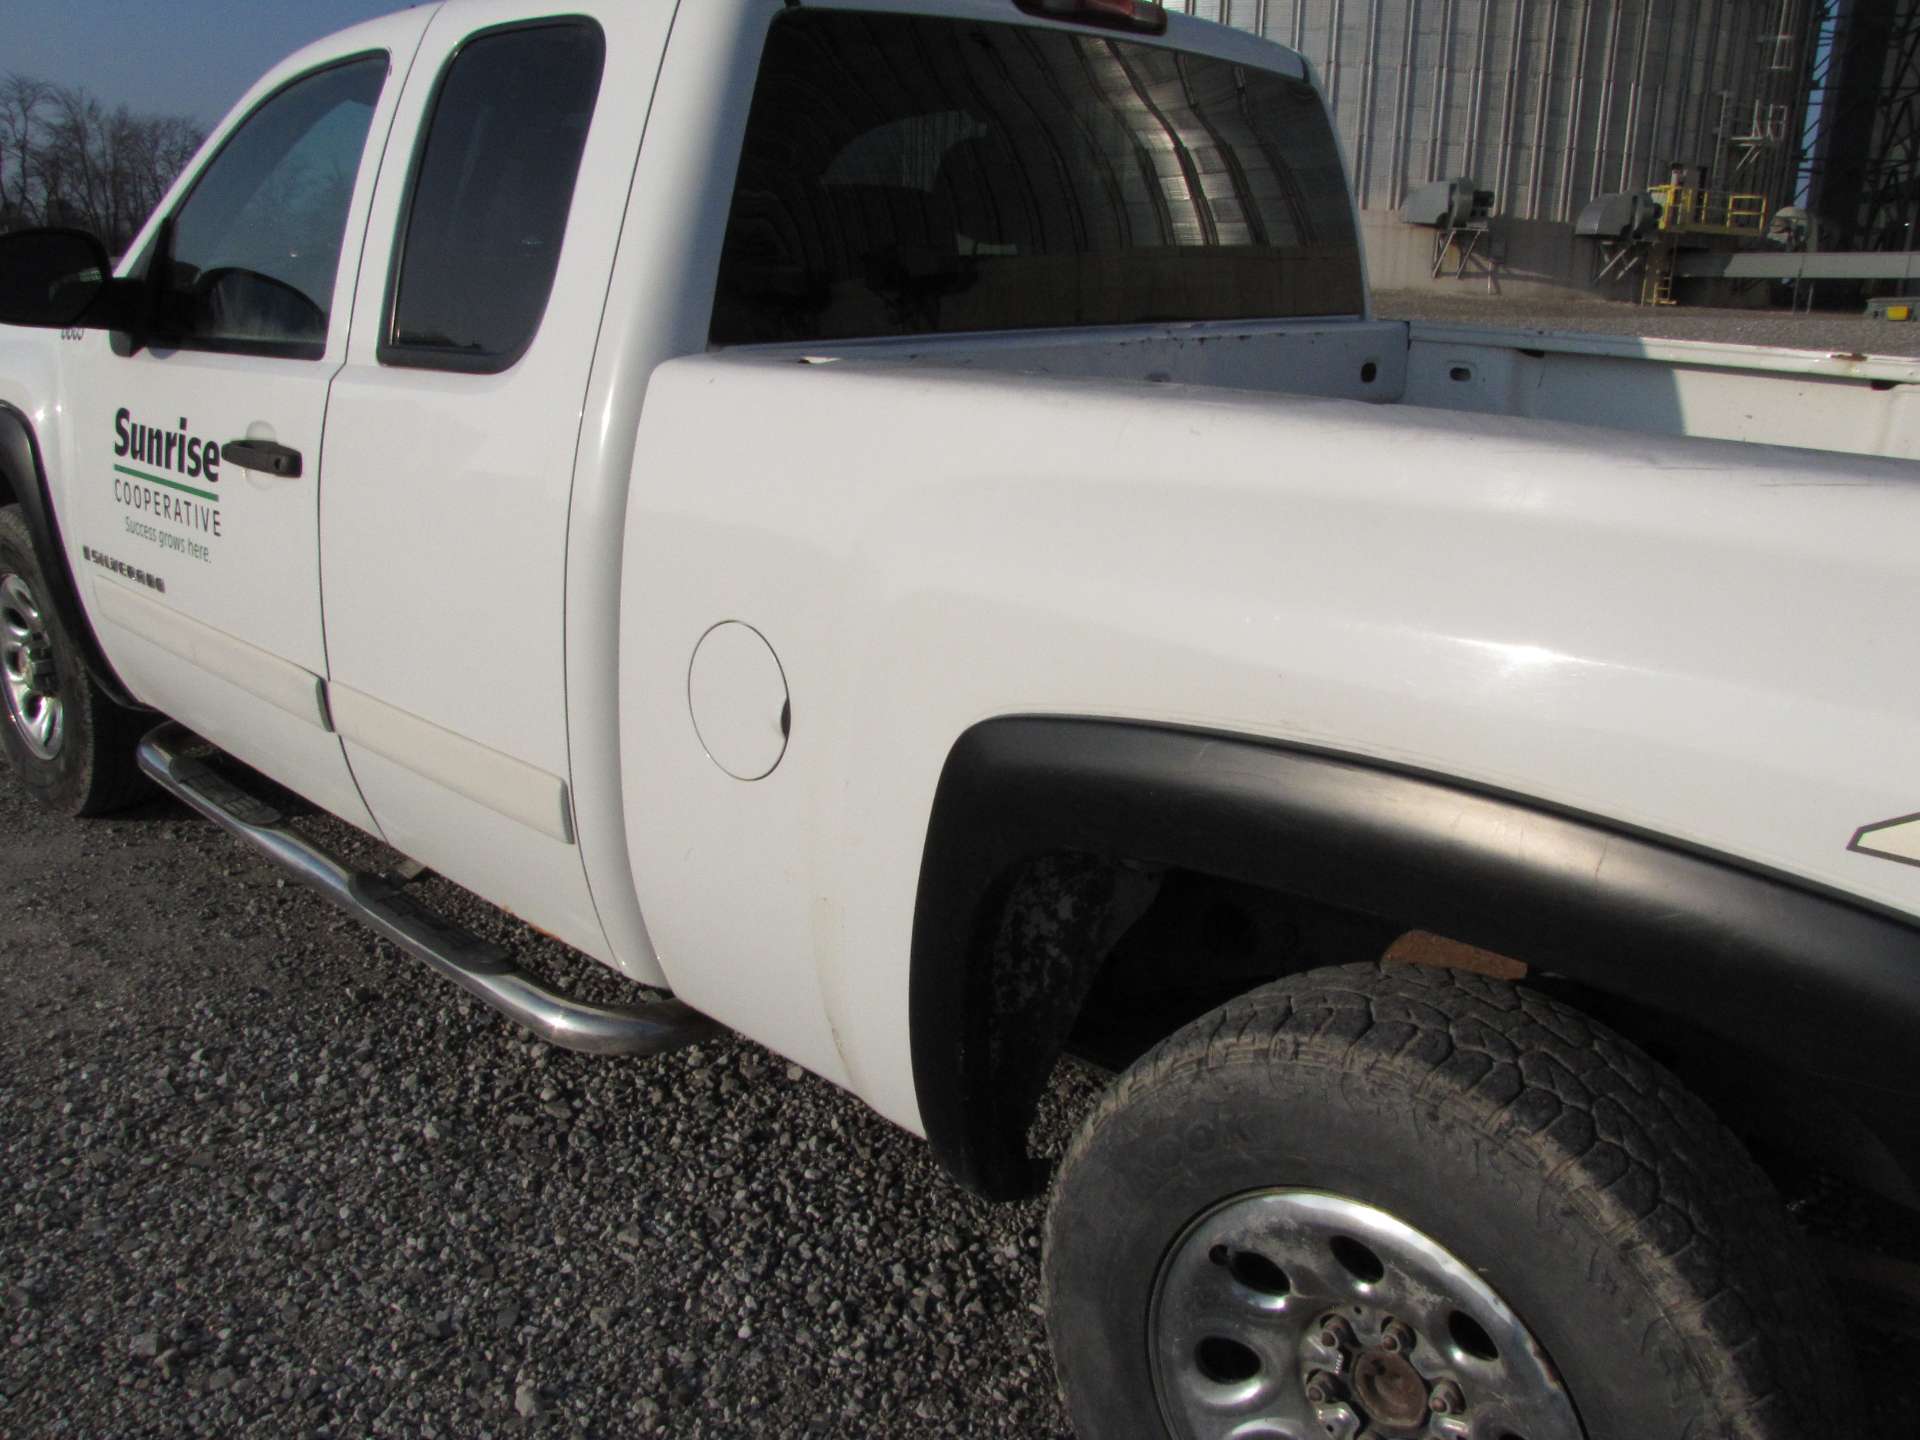 2008 Chevy Silverado 1500 LT Pickup Truck (CRACKED FRAME) - Image 19 of 43